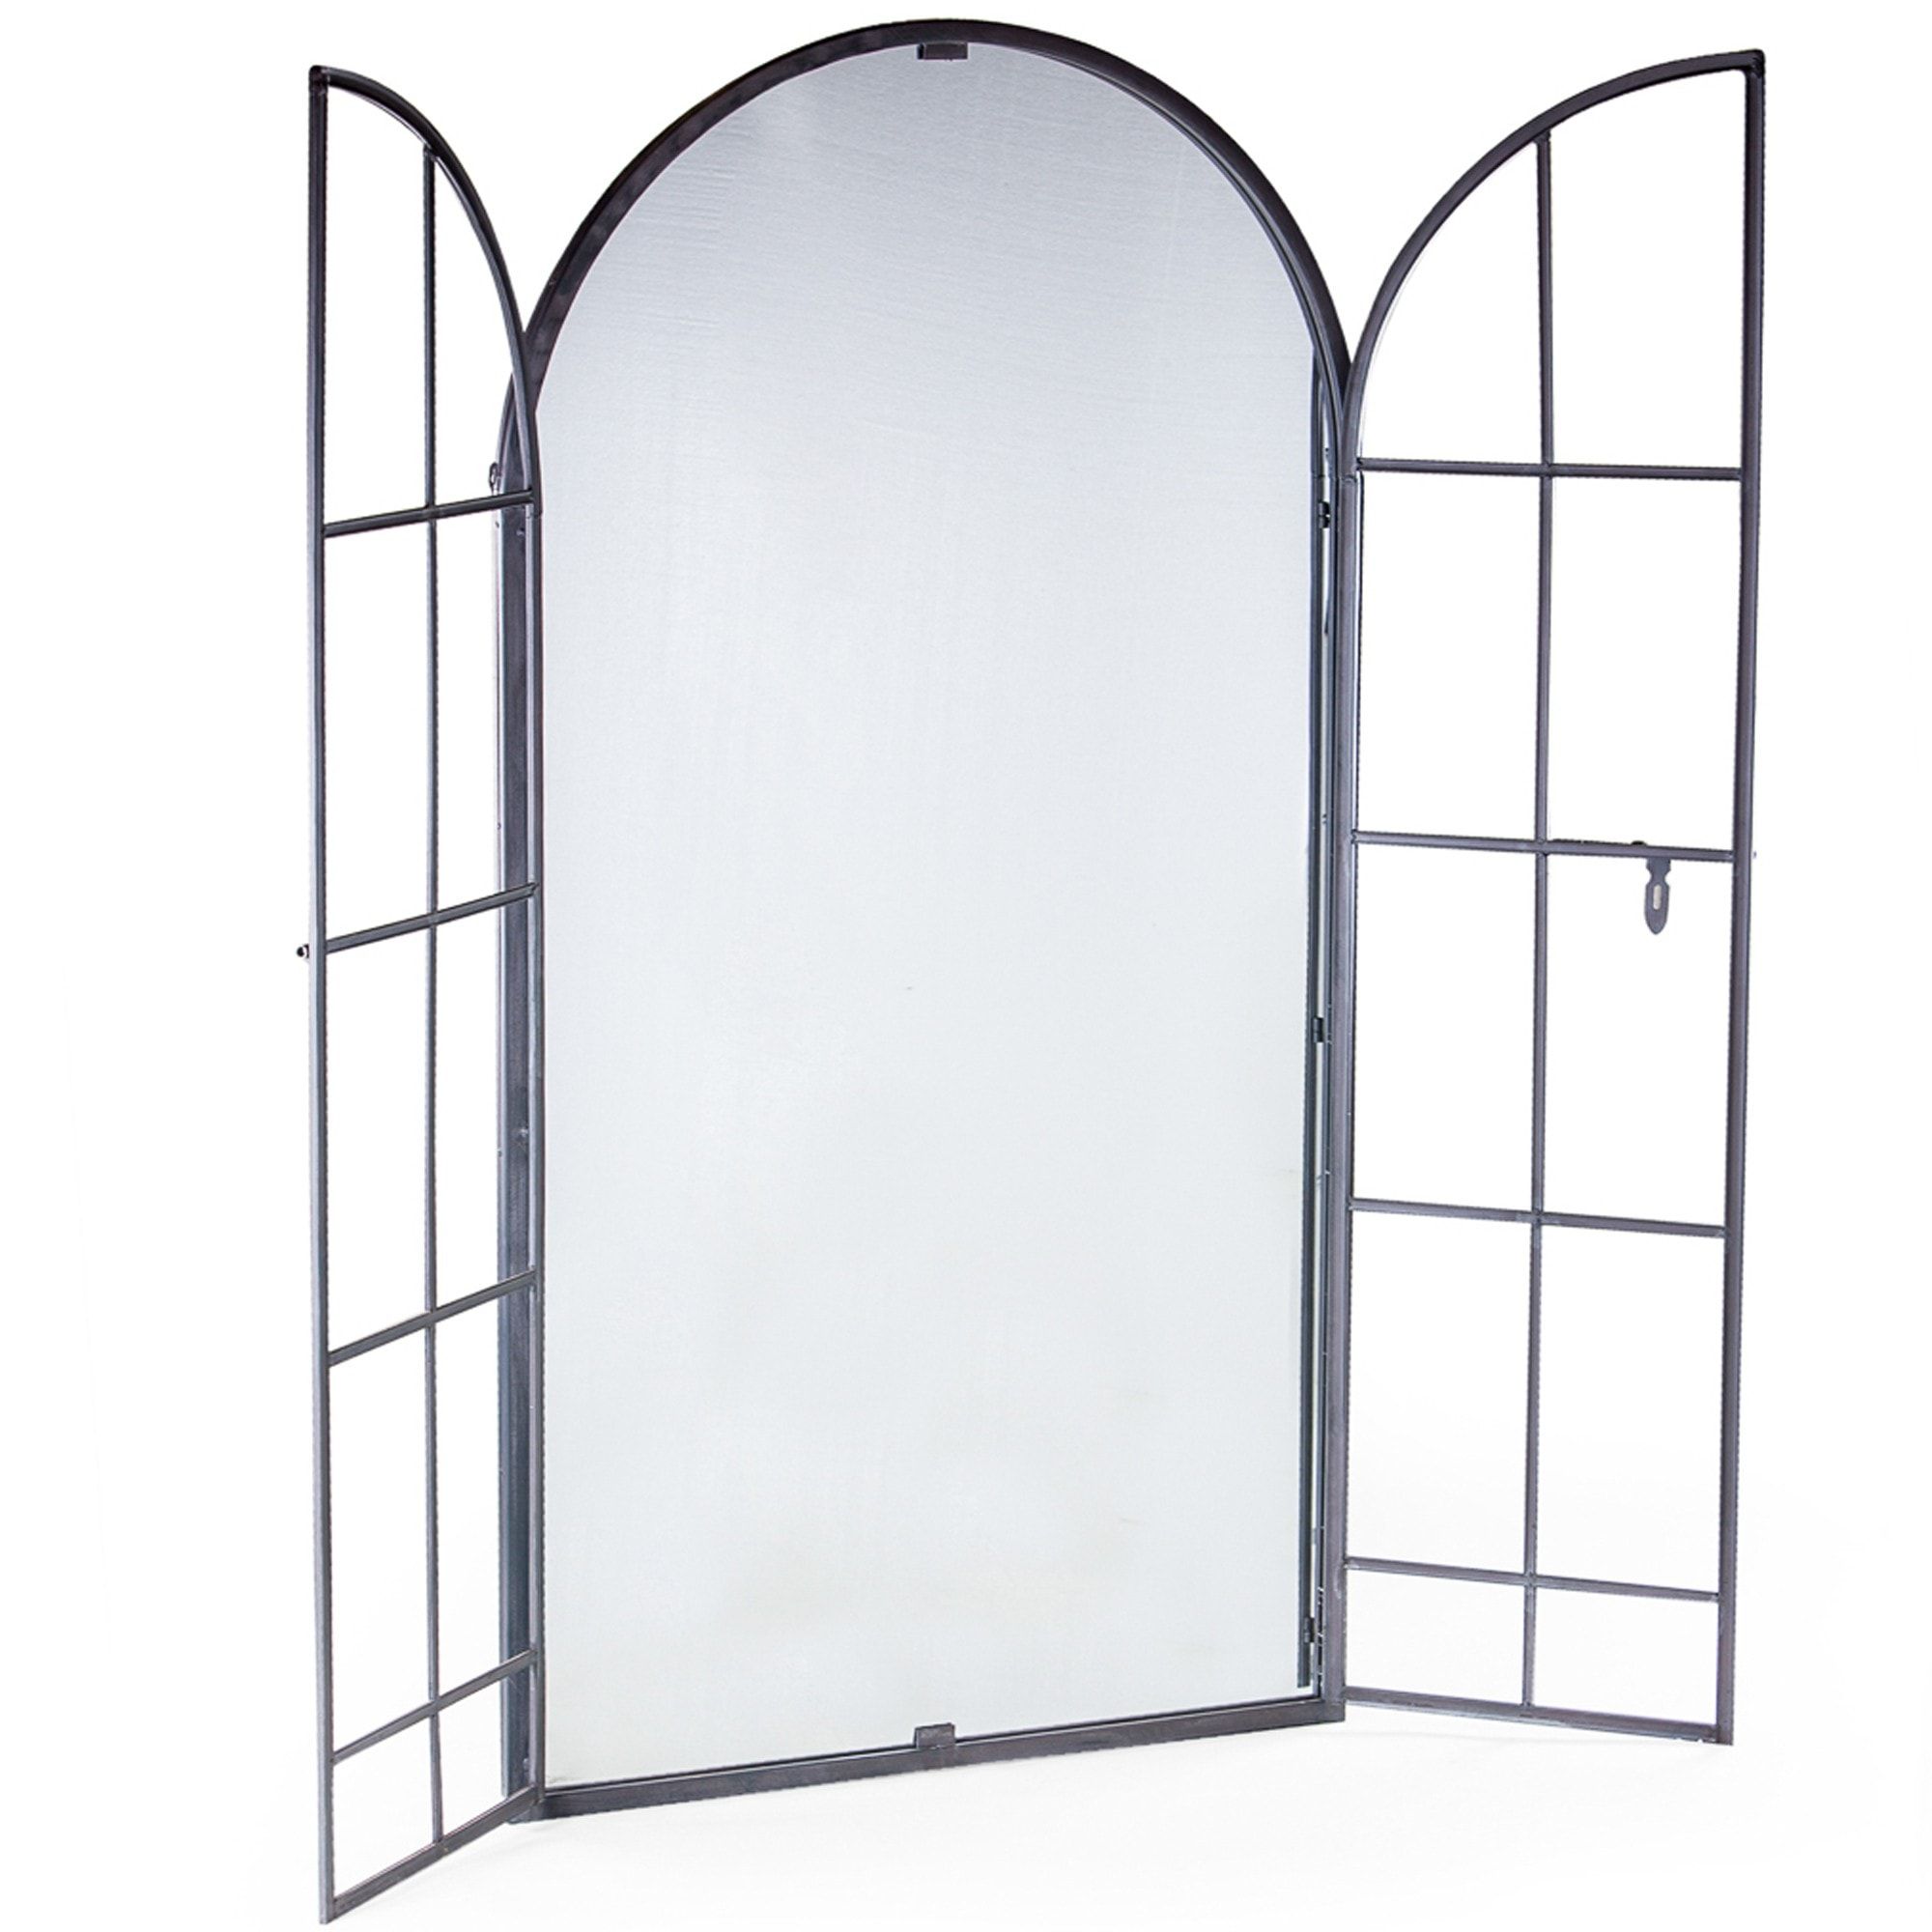 Antiqued Lead Grey Iron Large Arch Window Metal Mirror | Metal Mirror With Metal Arch Window Wall Mirrors (View 5 of 15)